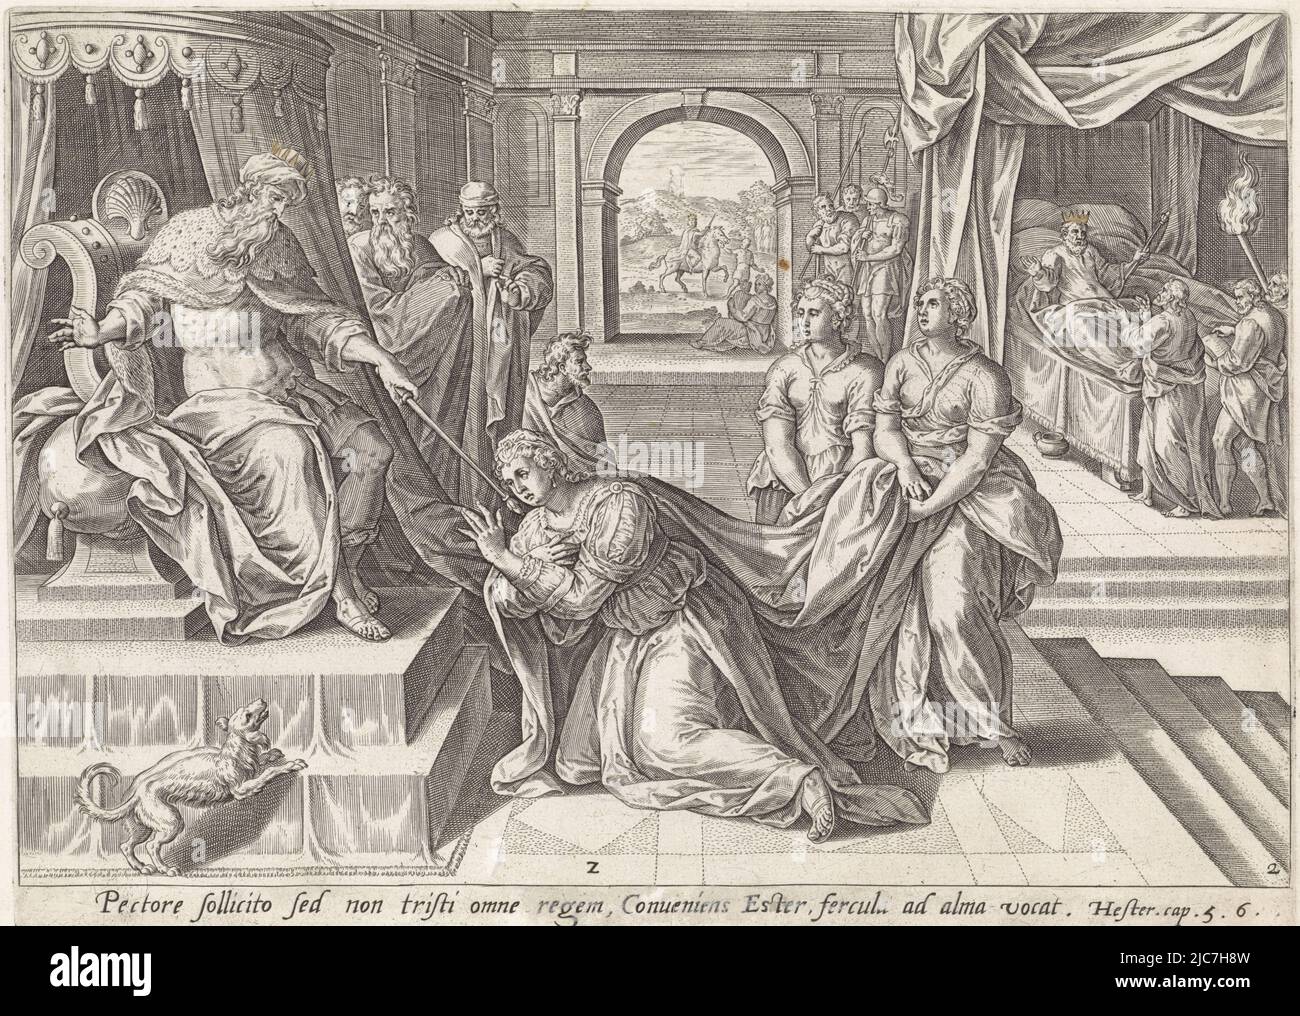 Esther kneels before King Ahasuerus. The king points his scepter at her as a sign of affection. Esther requests the king to come with Haman to the banquet she has arranged. In the background on the right is the continuation of the story. In the evening, the king has a reading from the chronicles of the kingdom. It says that Mordecai foiled an attempt on the king's life. The king asks Haman, who is standing by the bed, how someone who saved the king's life should be honored. In the background, Mordecai can be seen being wheeled around in the king's robe and on his horse, while Haman shows him Stock Photo